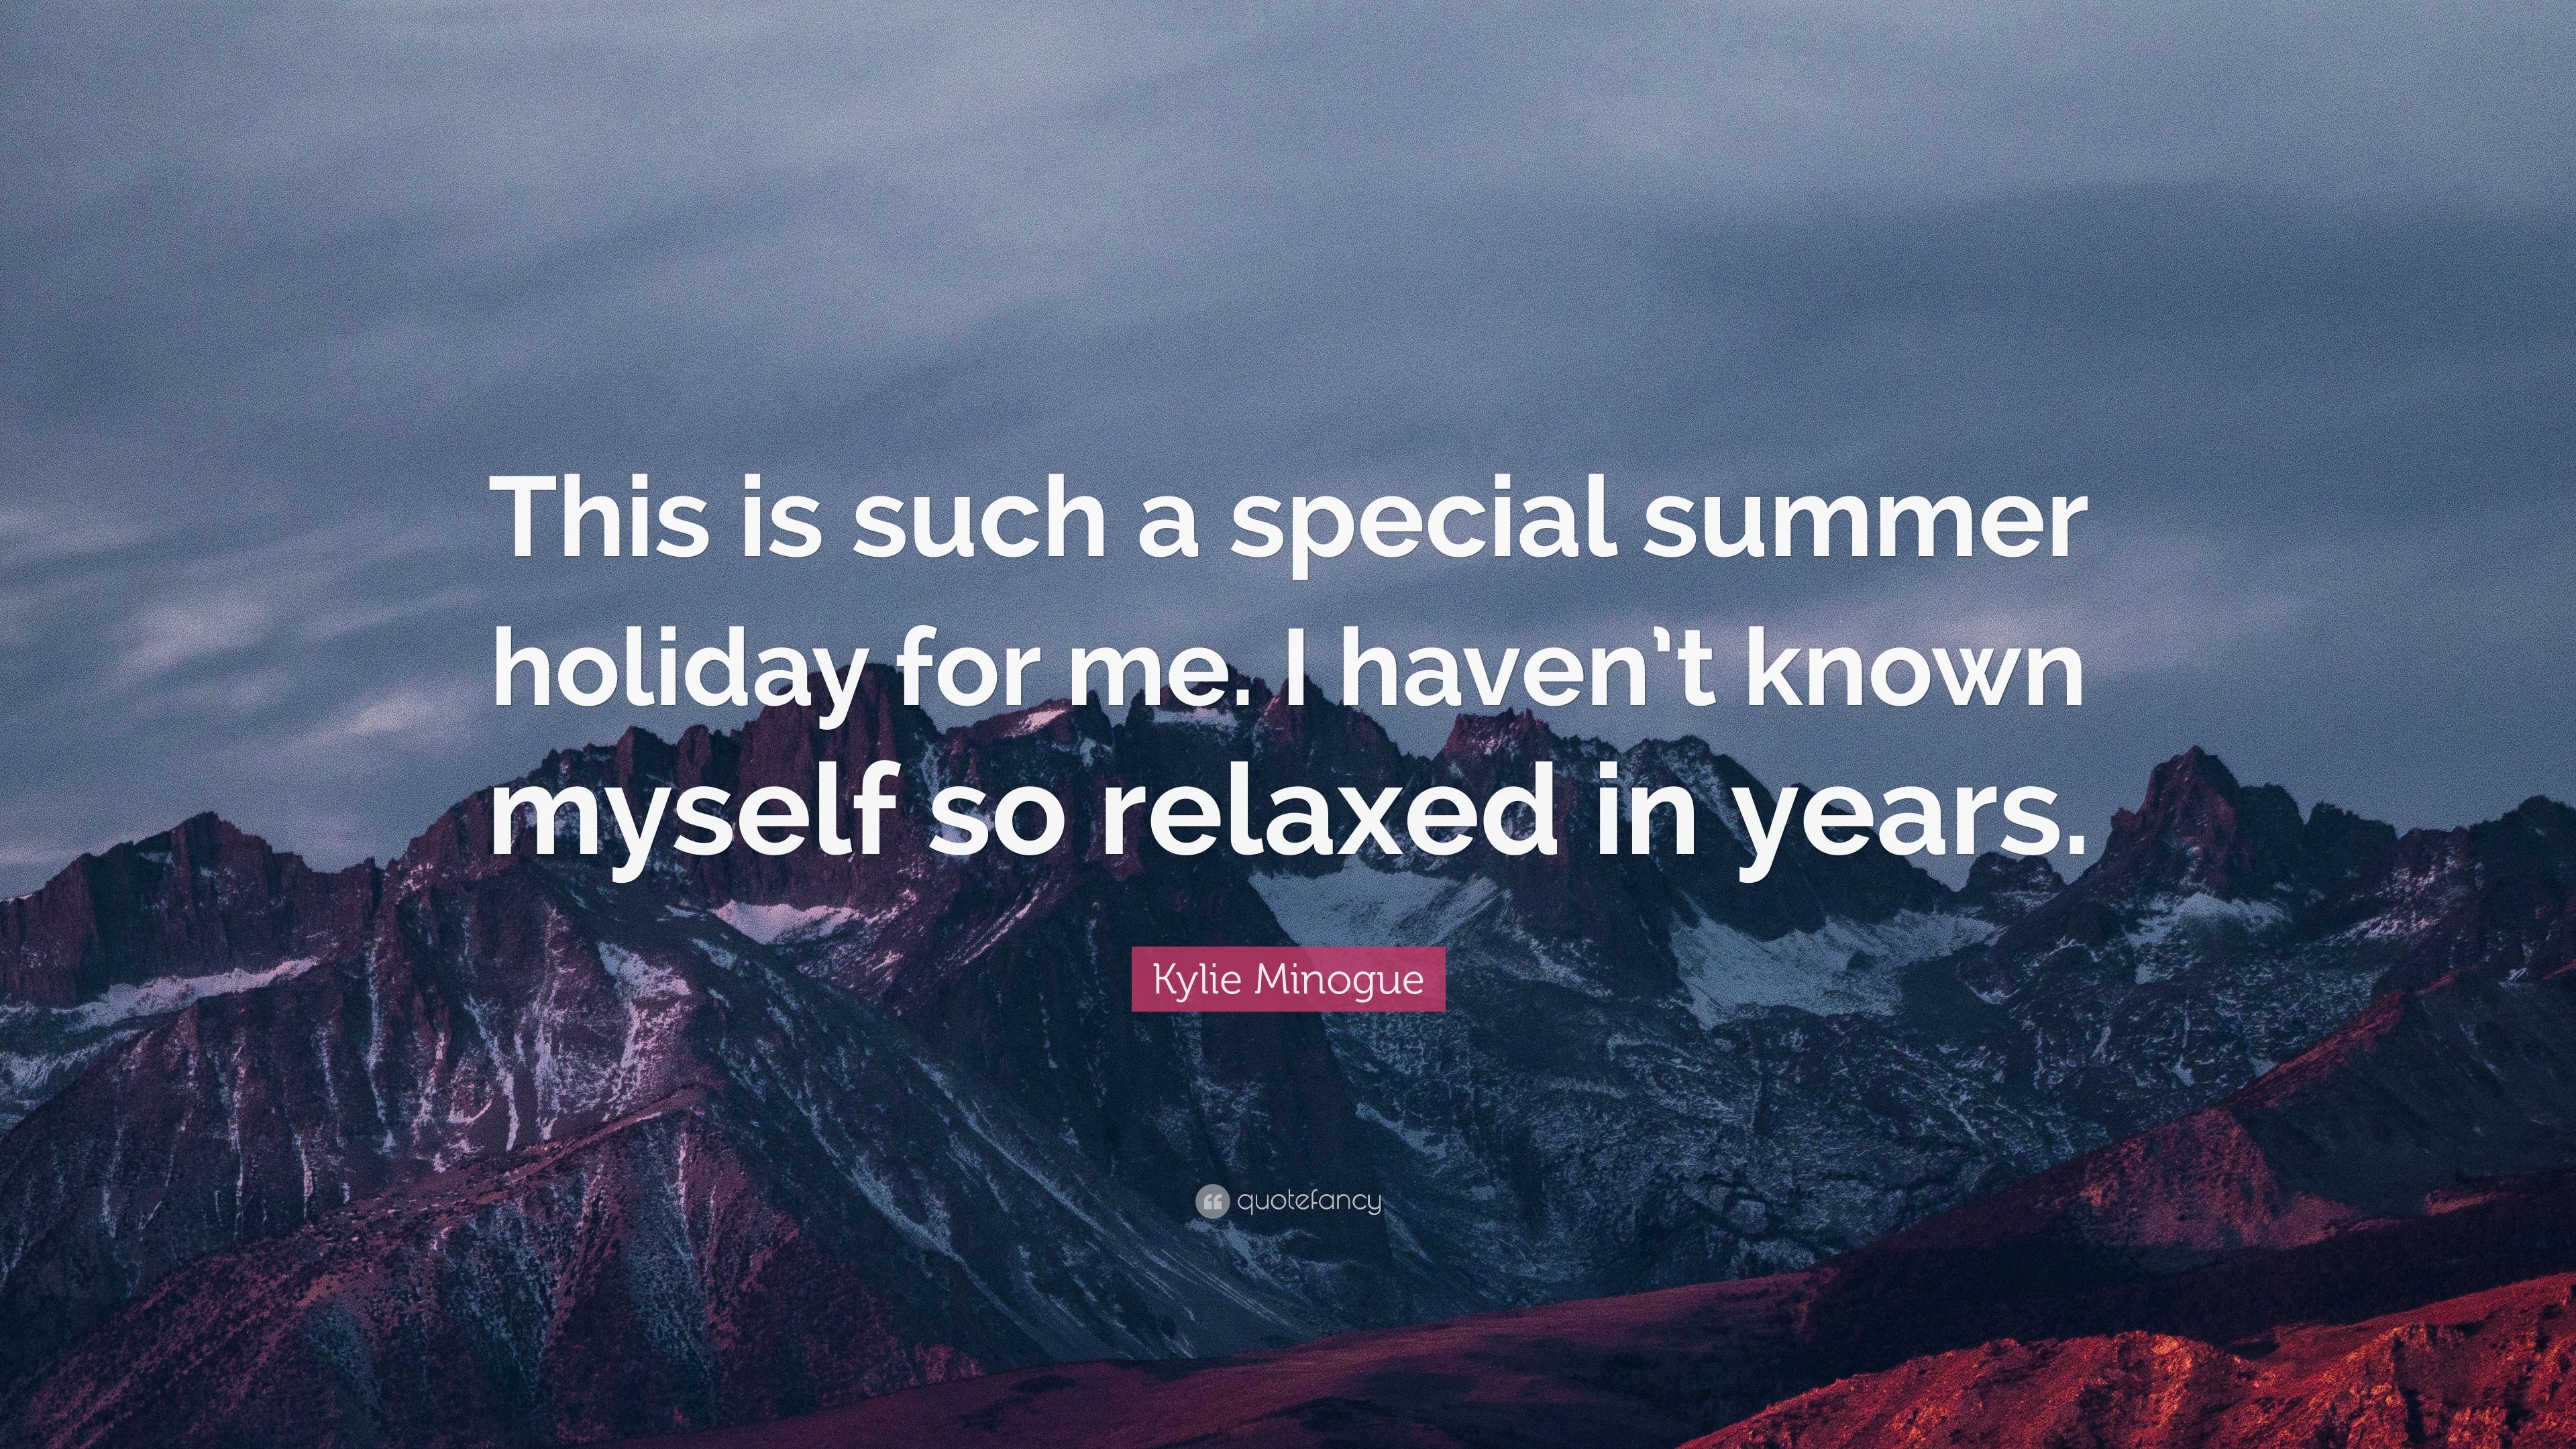 Kylie Minogue Quote: “This is such a special summer holiday for me